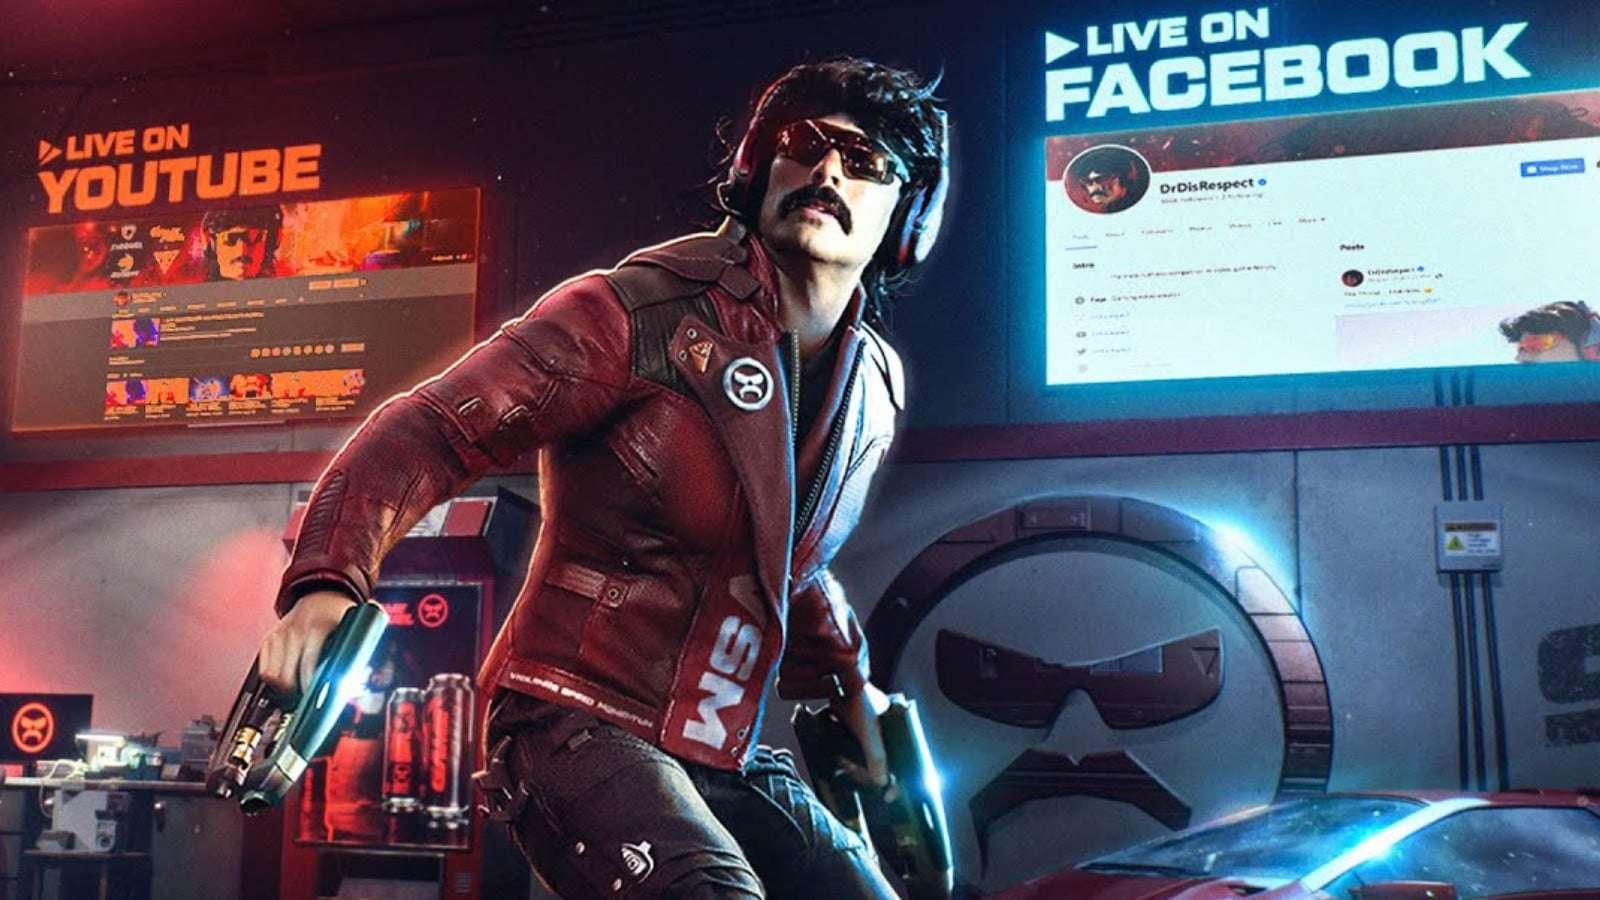 Dr Disrespect stream on facebook and youtube